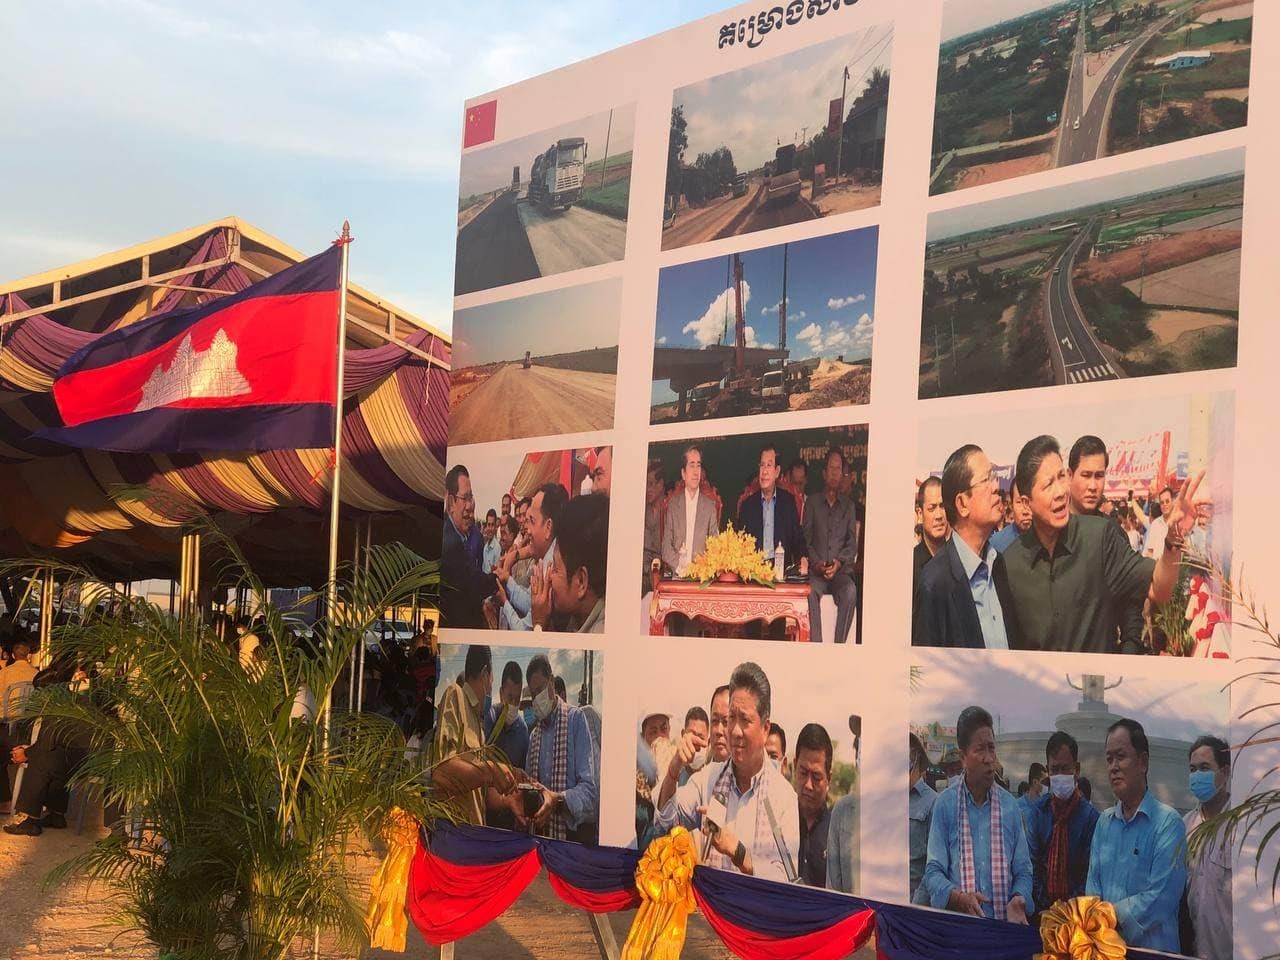 Samdech Techo Hun Sen Presides over the inauguration Ceremony of National Road No. 11 and roads in Prey Veng city worth nearly US$100 million